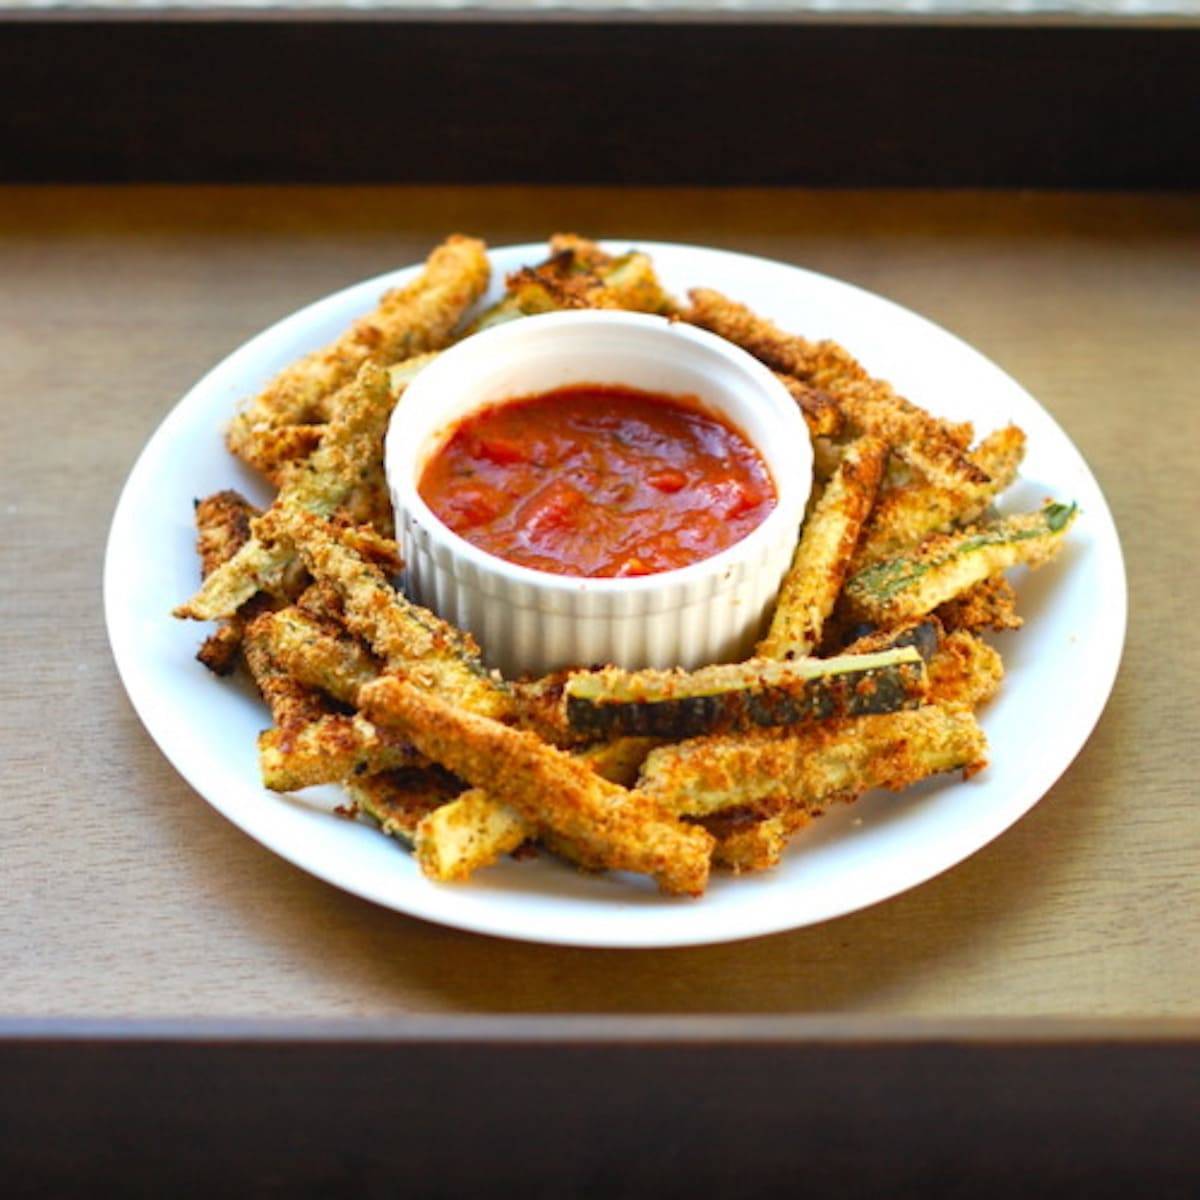 Baked Zucchini Fries with sauce on a plate.